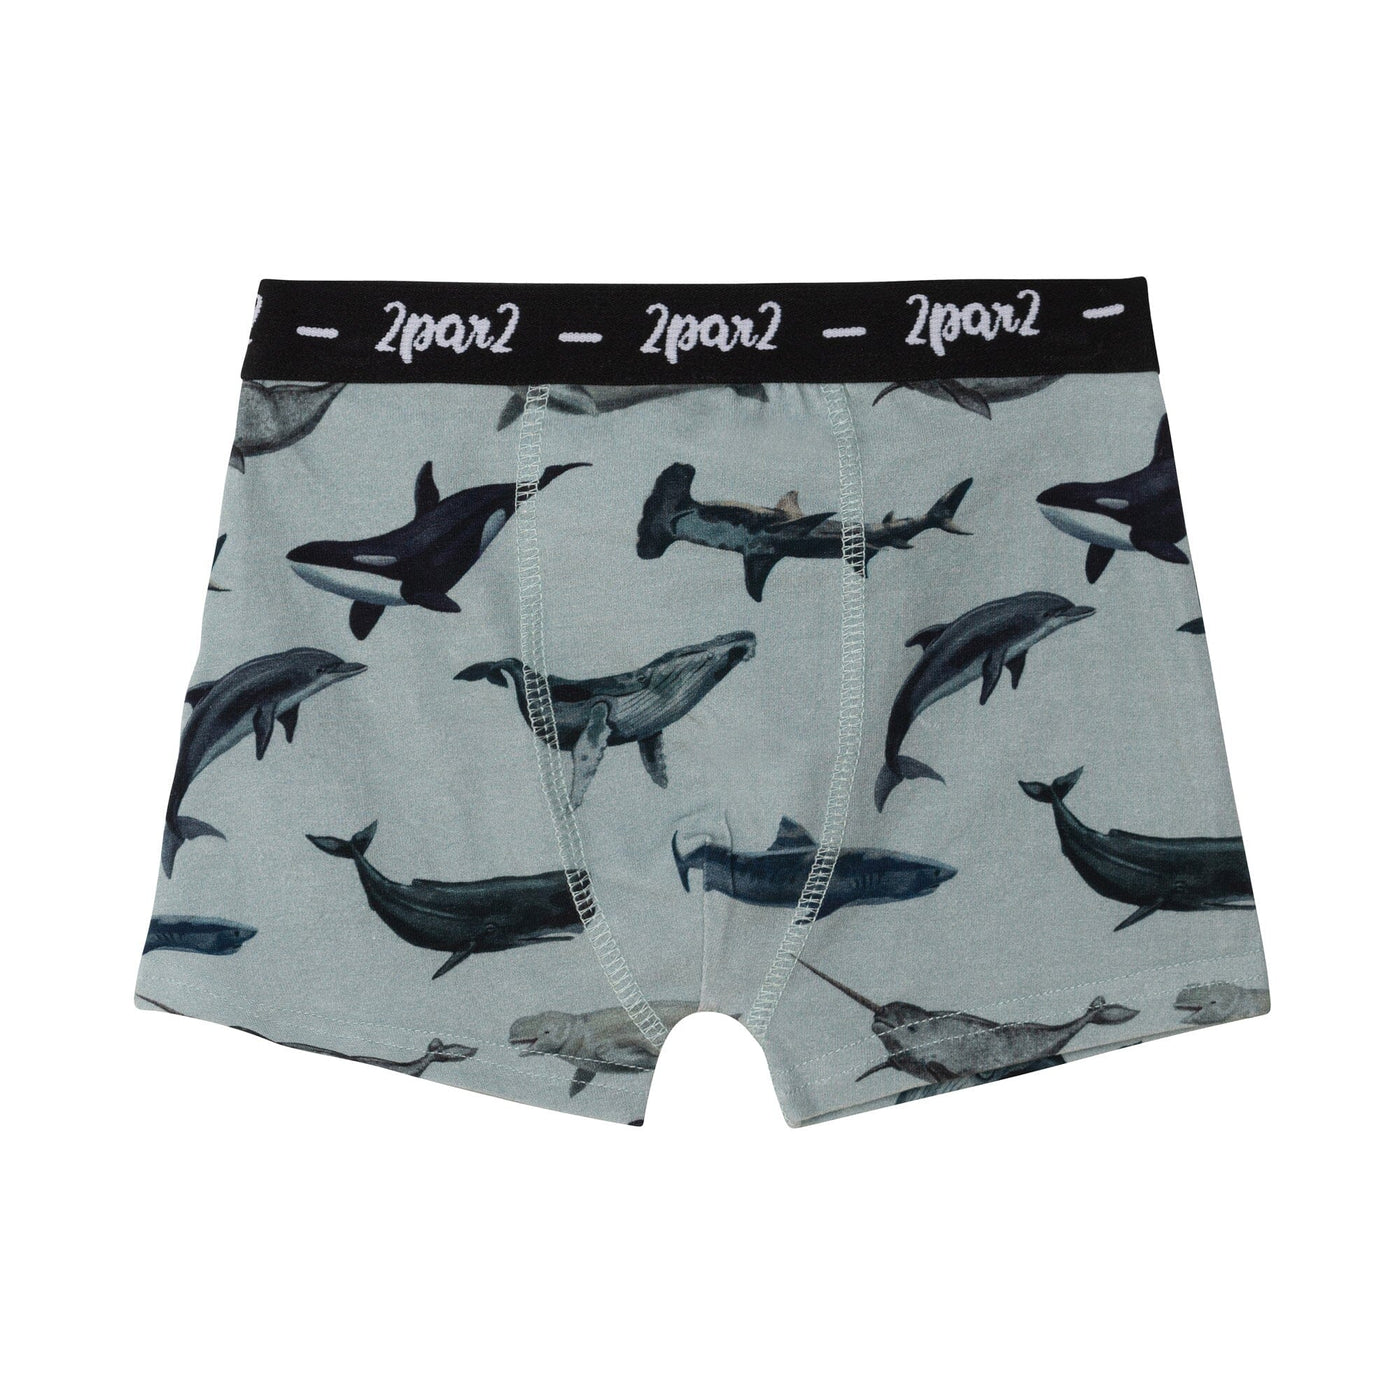 Printed Boxer Short Blue Sharks & Whales